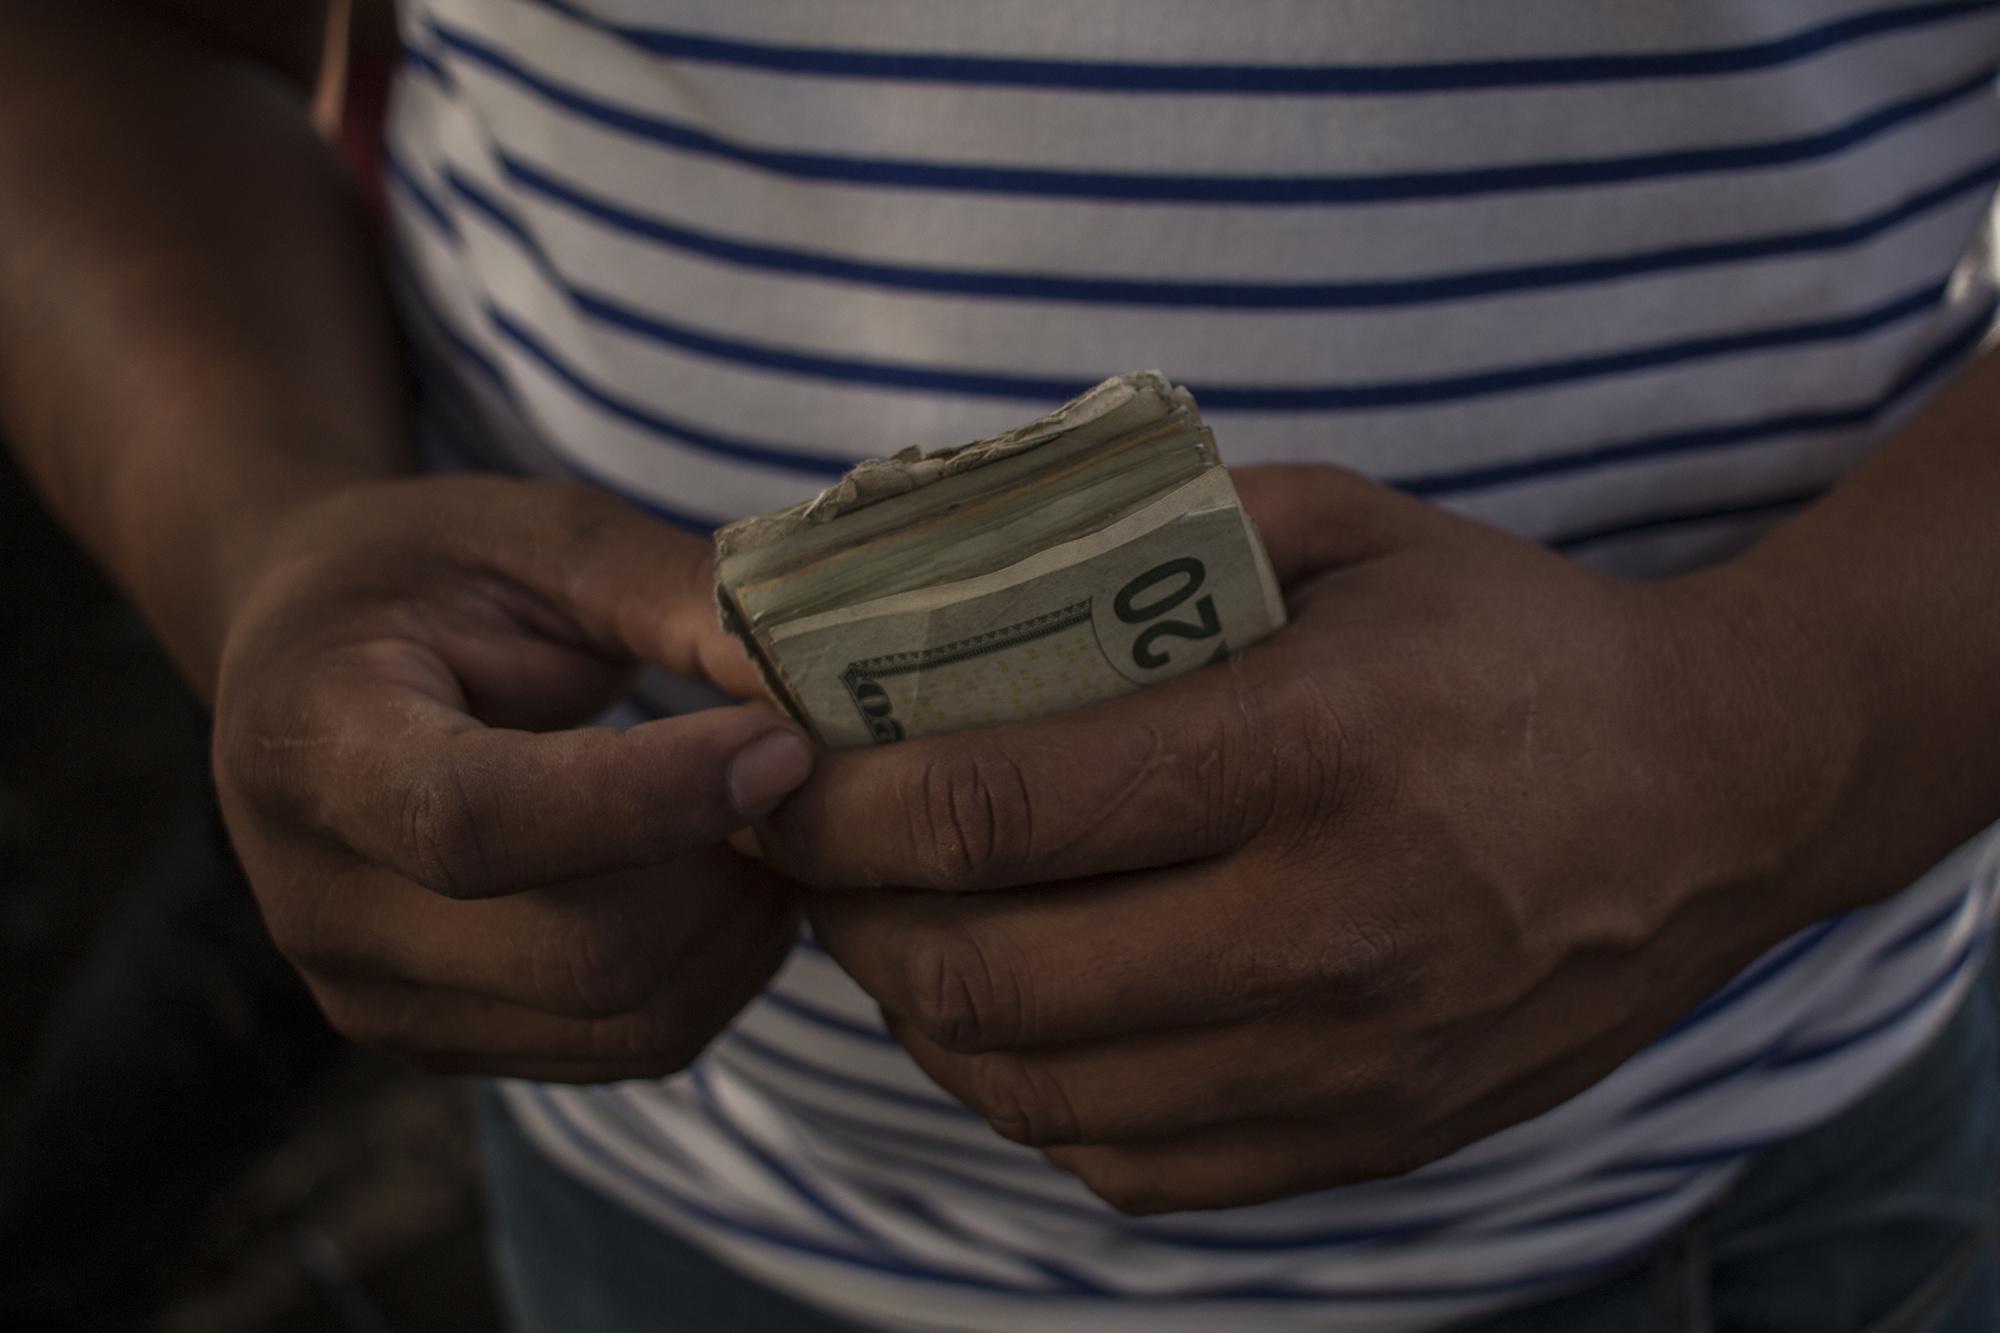 Jose Cornejo, 30, shows his money that he’ll do business with this workday. He is a resident of San Rafael Cedros and each Saturday he arrives at 4:30 a.m. to look for the best offer to buy and sell pigs. “Here, it’s cash for cash. This Bitcoin thing will alter this business because it’s complicated to adapt to that currency,” Cornejo says, claiming he makes about $100 during a day of business at the tiangue.